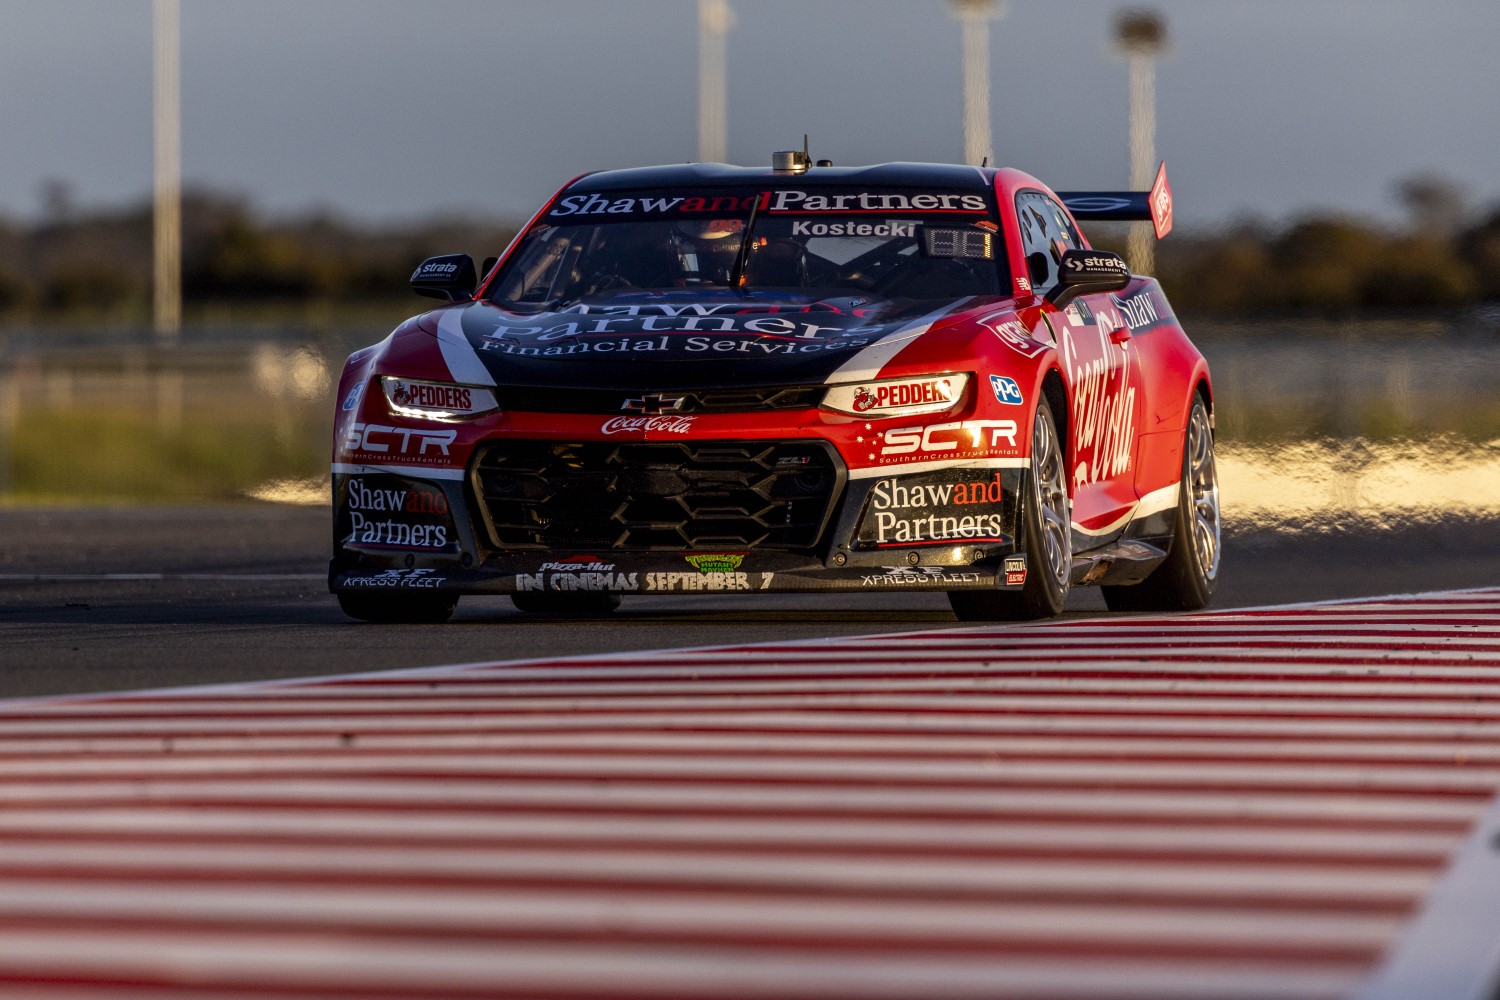 Brodie Kostecki wins race 1 of the 2023 OTR SuperSprint, Event 8 of the Repco Supercars Championship, The Bend, Tailem Bend, South Australia, Australia. 19 Aug, 2023.